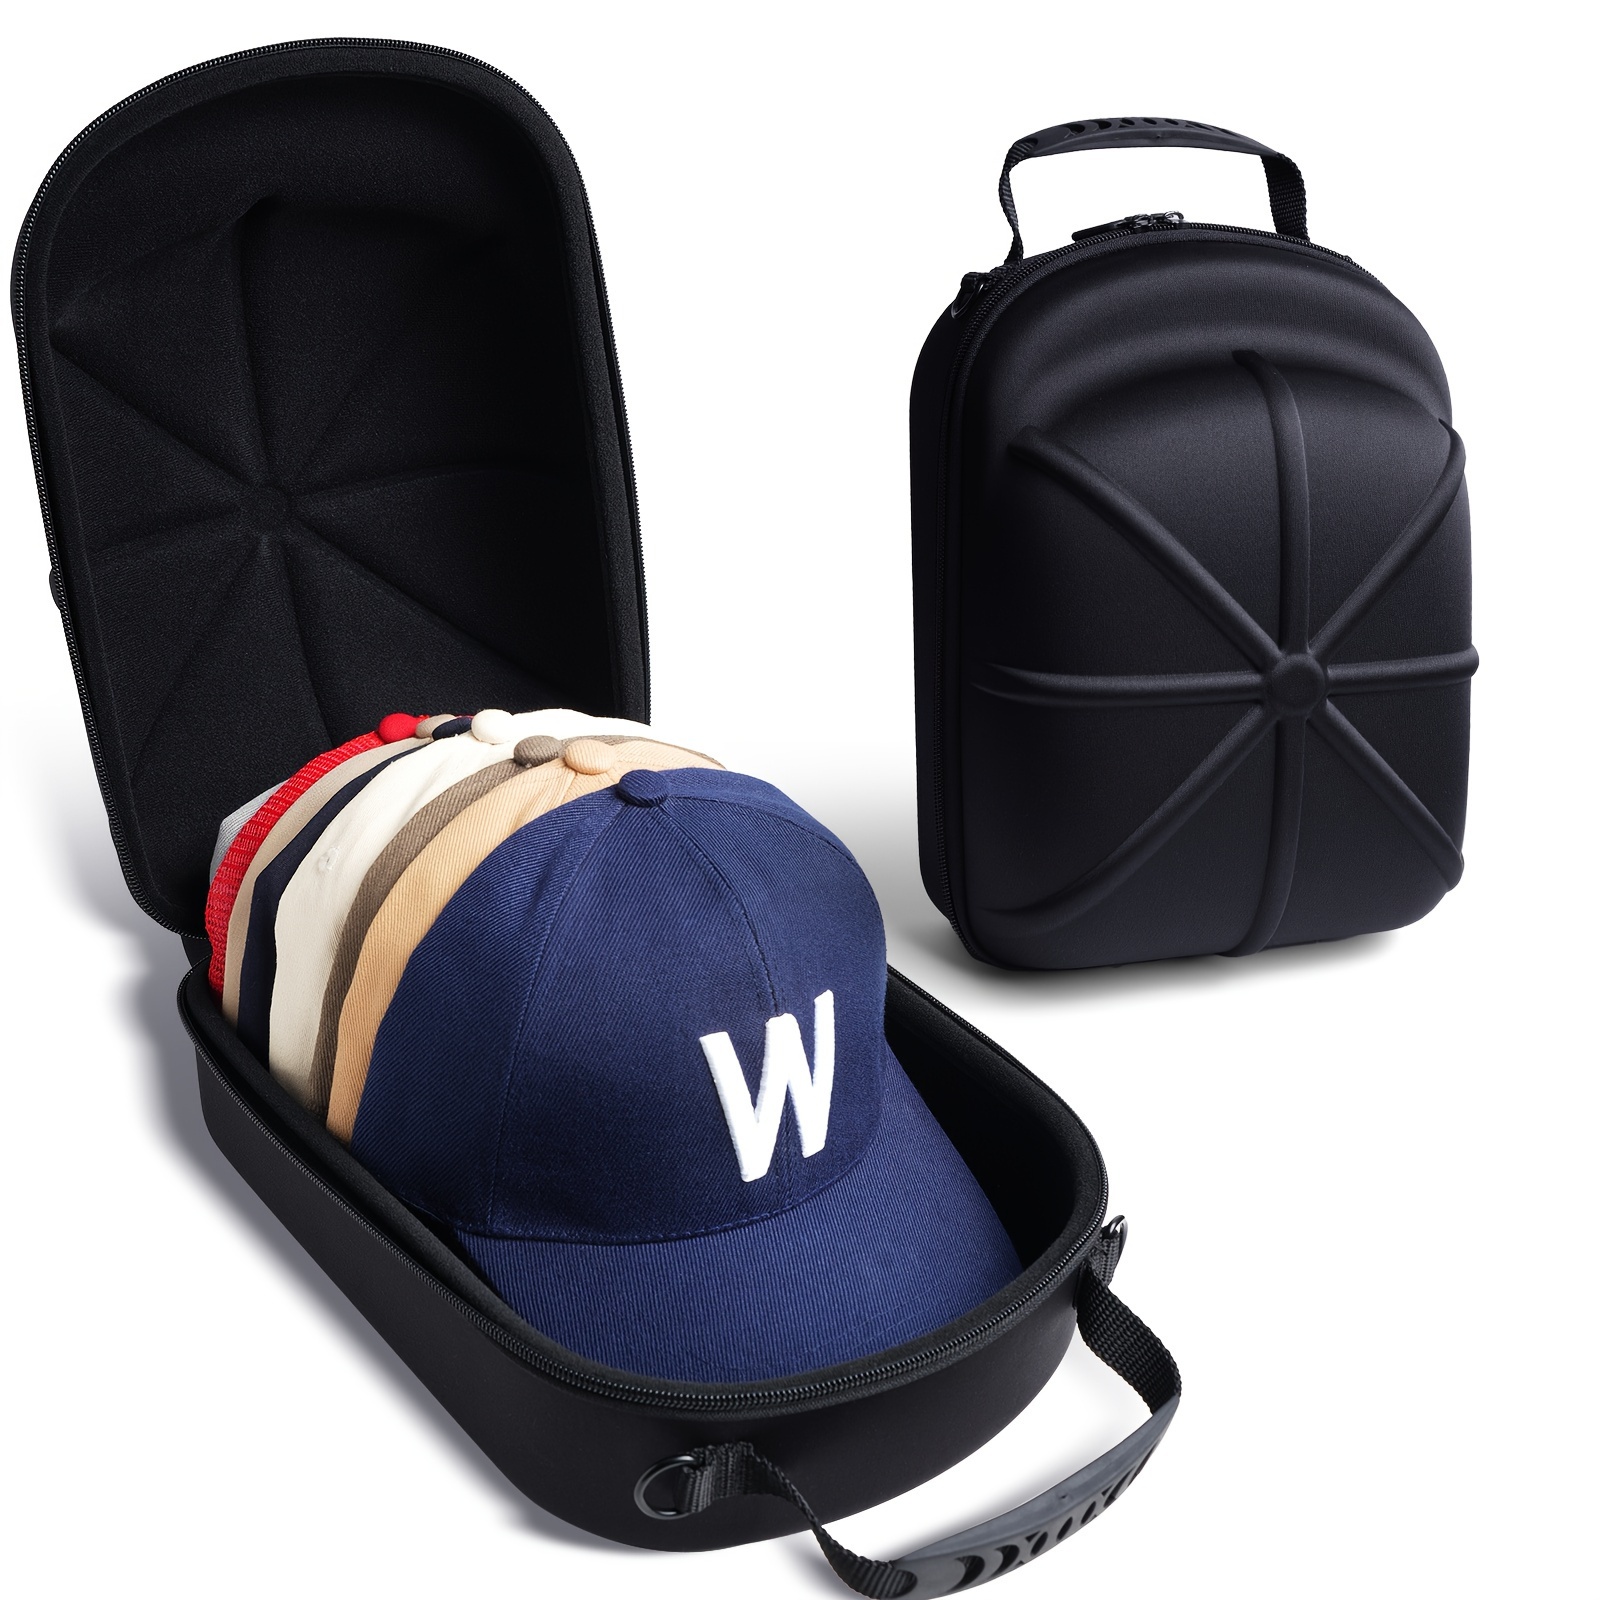 

1pc Hard Shell Cap Carrier Case, Fabric Baseball Hat Storage With Handle, Anti-crush Waterproof Dustproof Organizer For Travel & Home Use